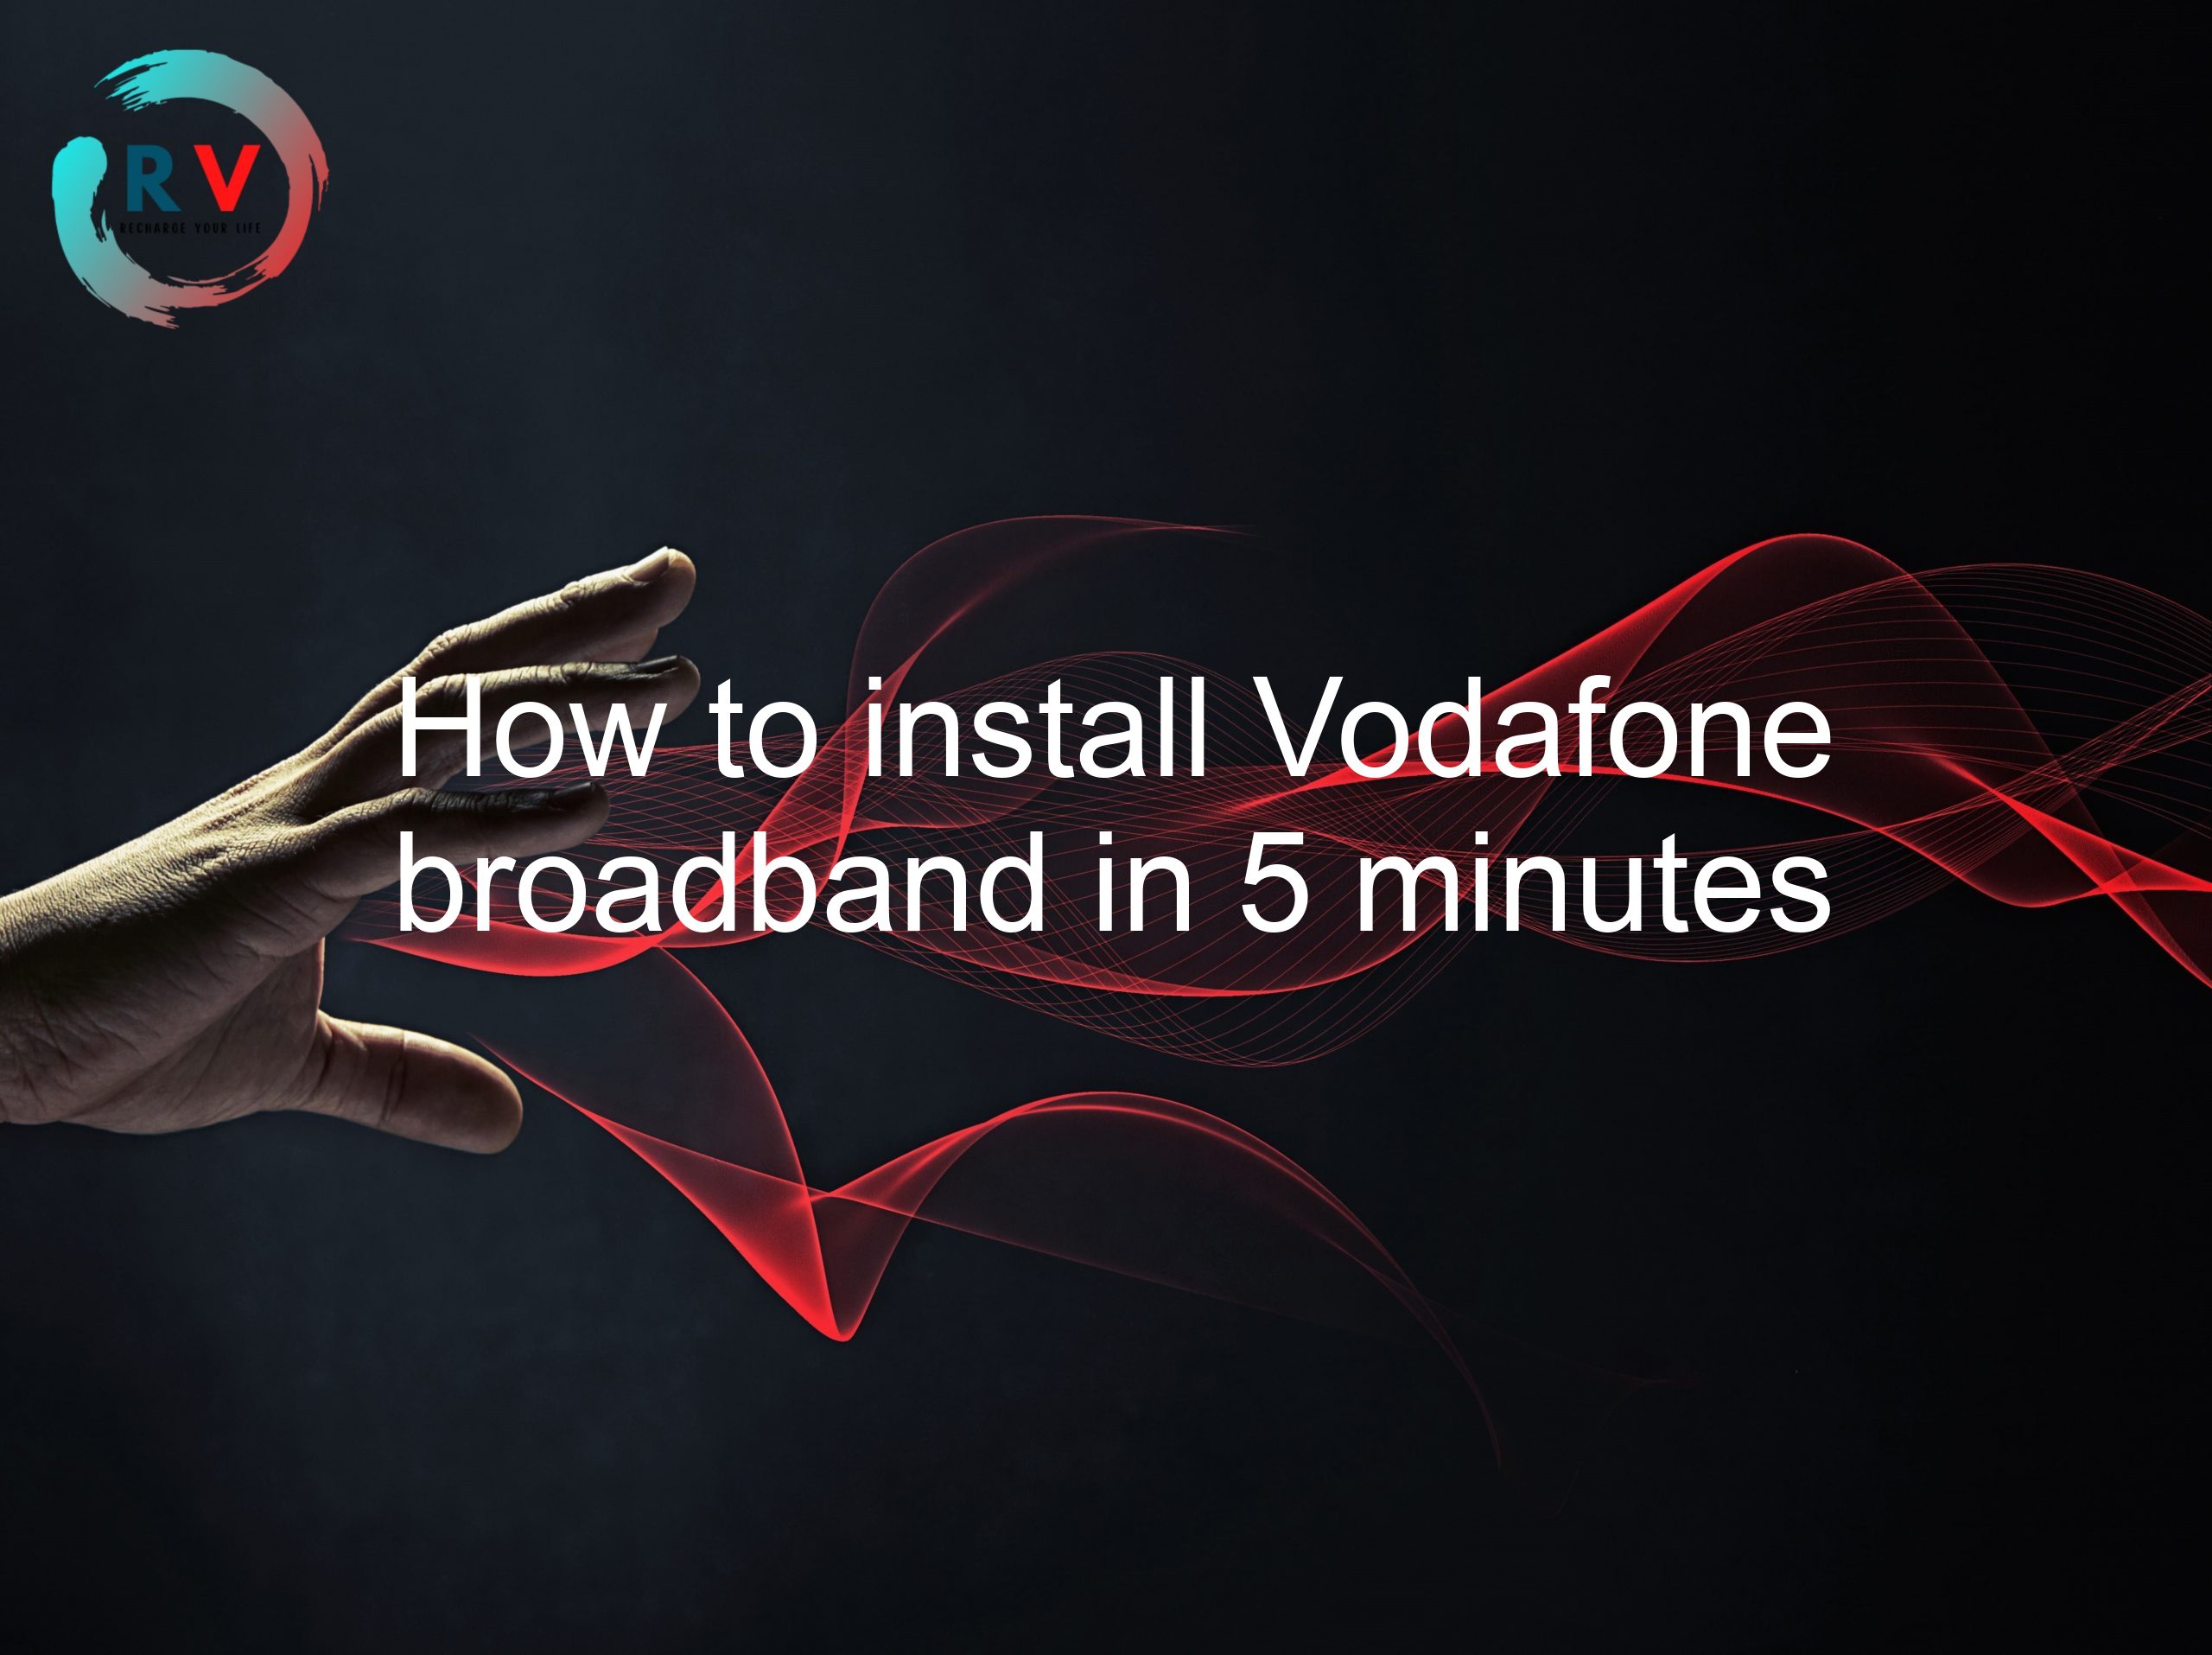 How to install Vodafone broadband in 5 minutes